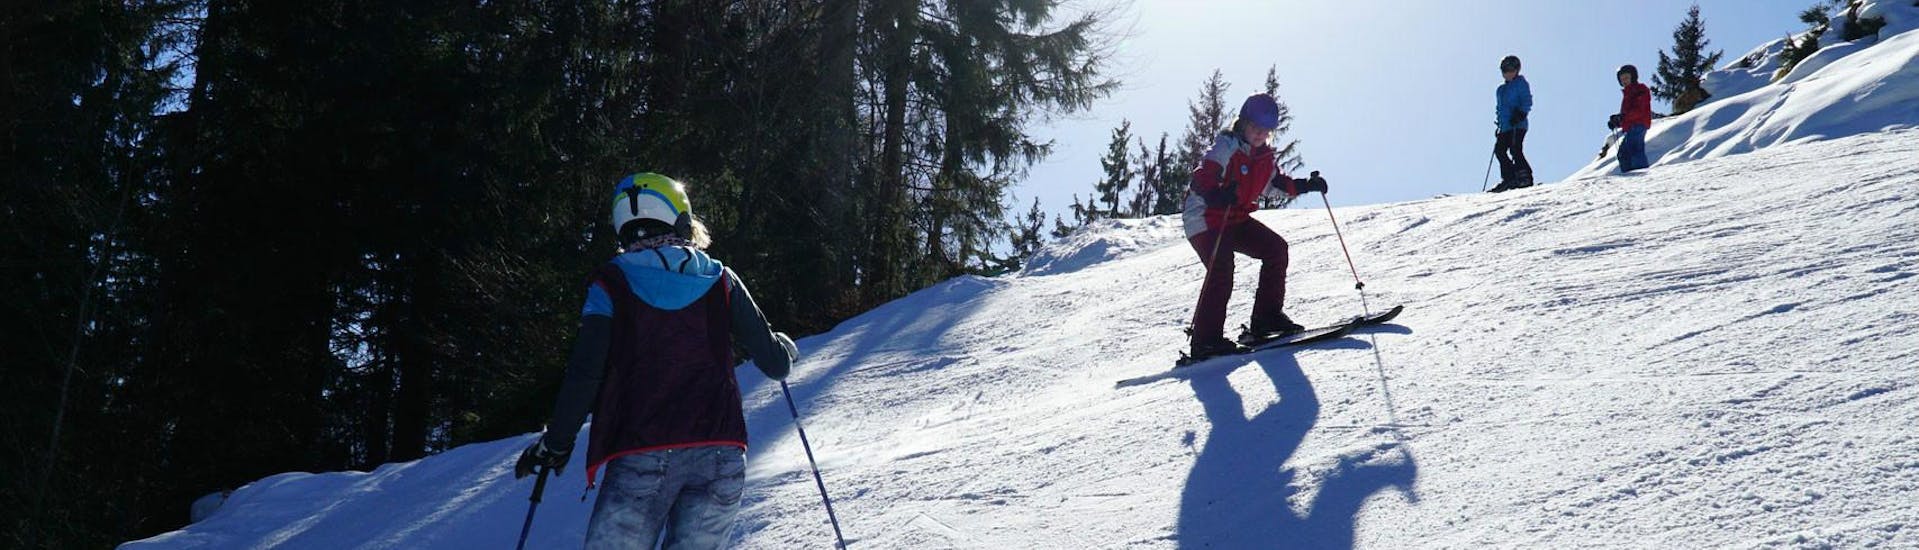 Ski Lessons for Kids (8-15 years) - Weekend - All Levels.